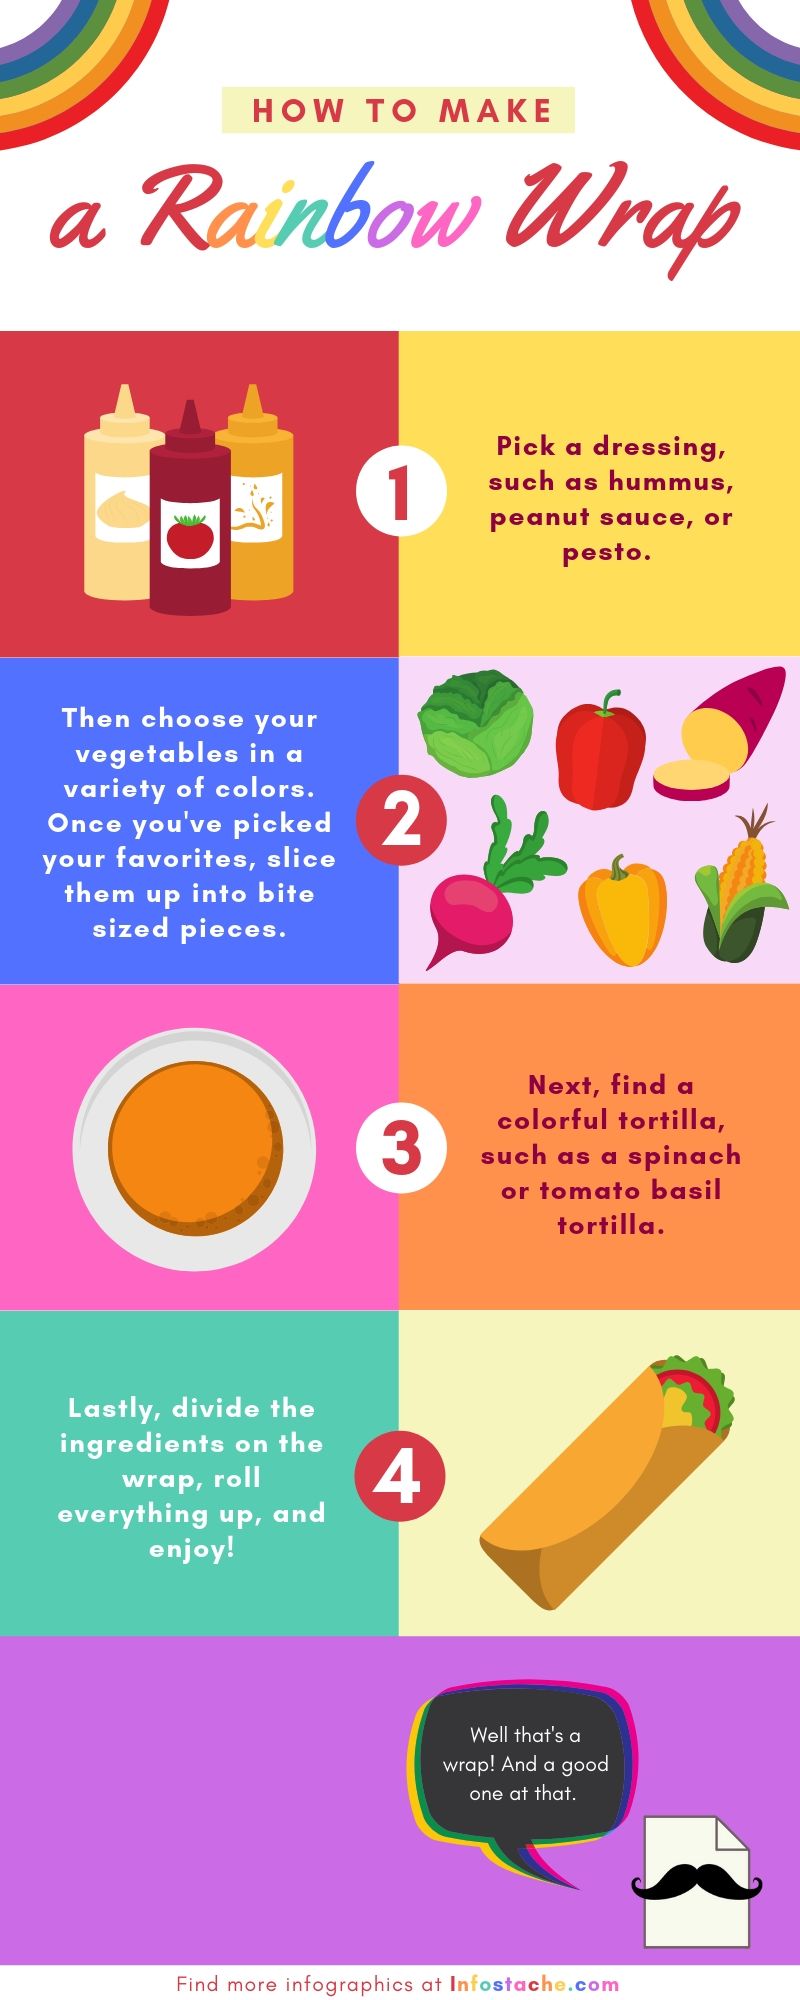 How to Make a Rainbow Wrap - Infographic